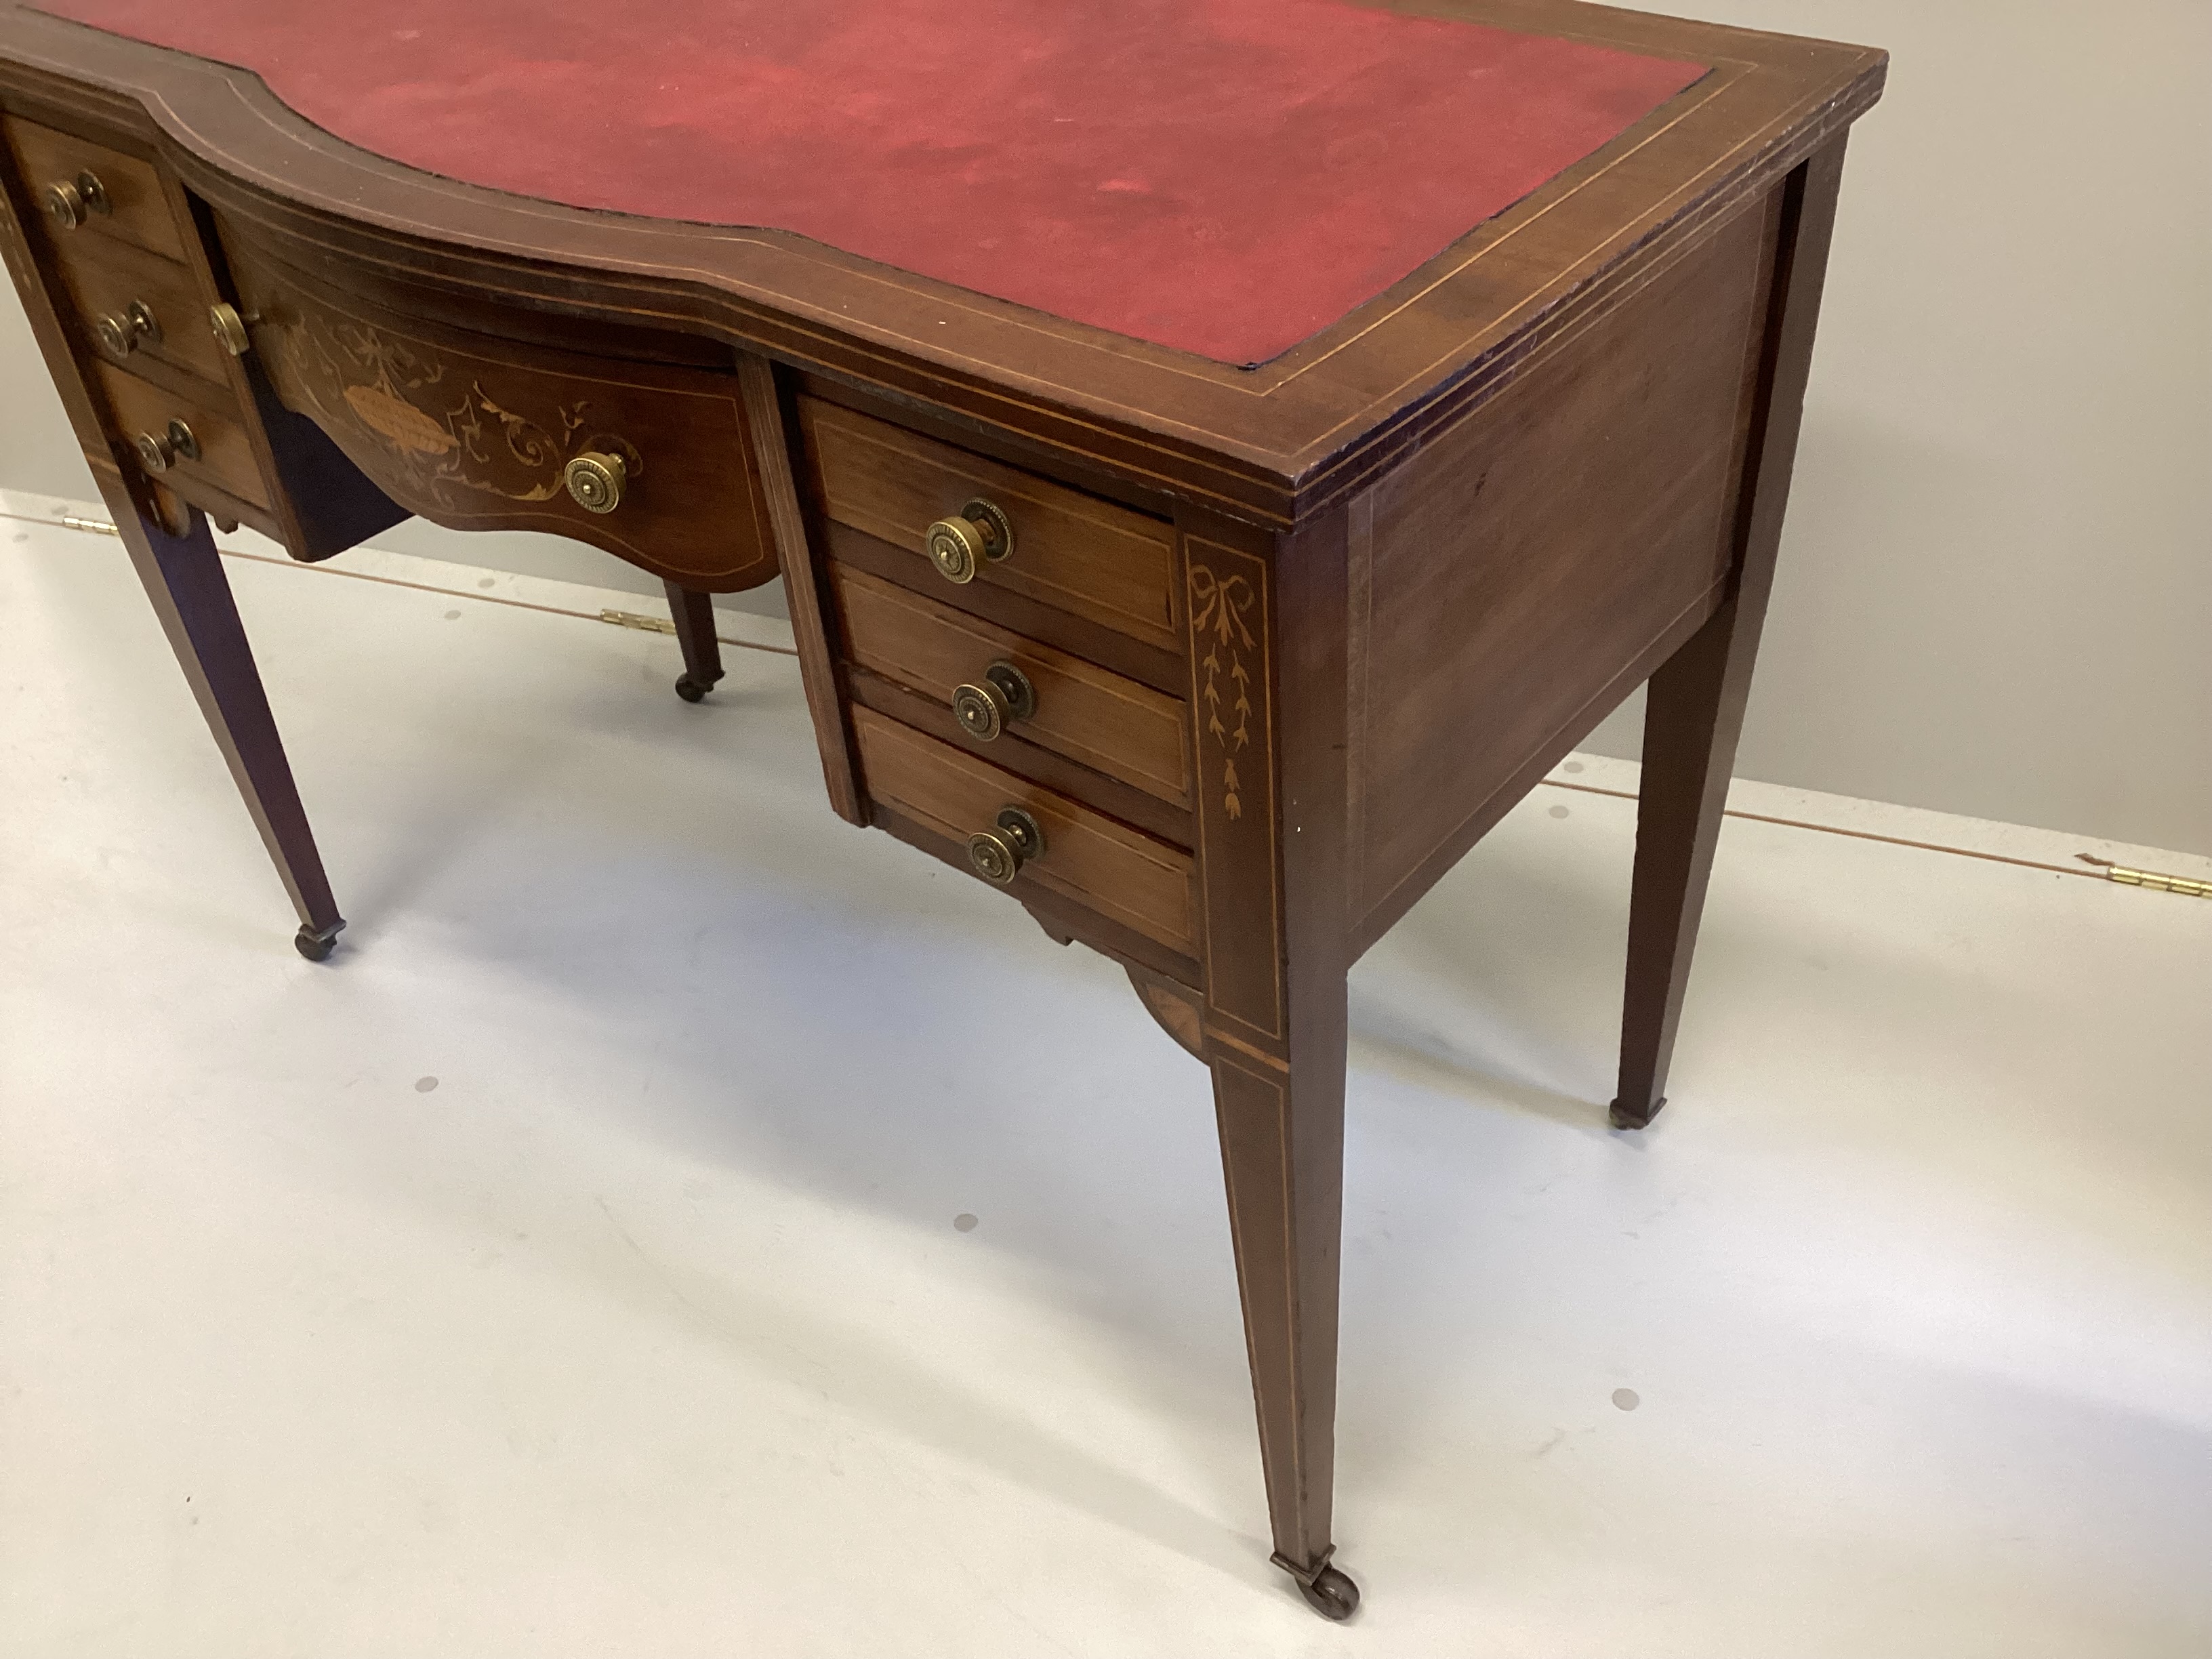 An Edwardian inlaid mahogany bowfront kneehole writing table, width 99cm, depth 52cm, height 73cm